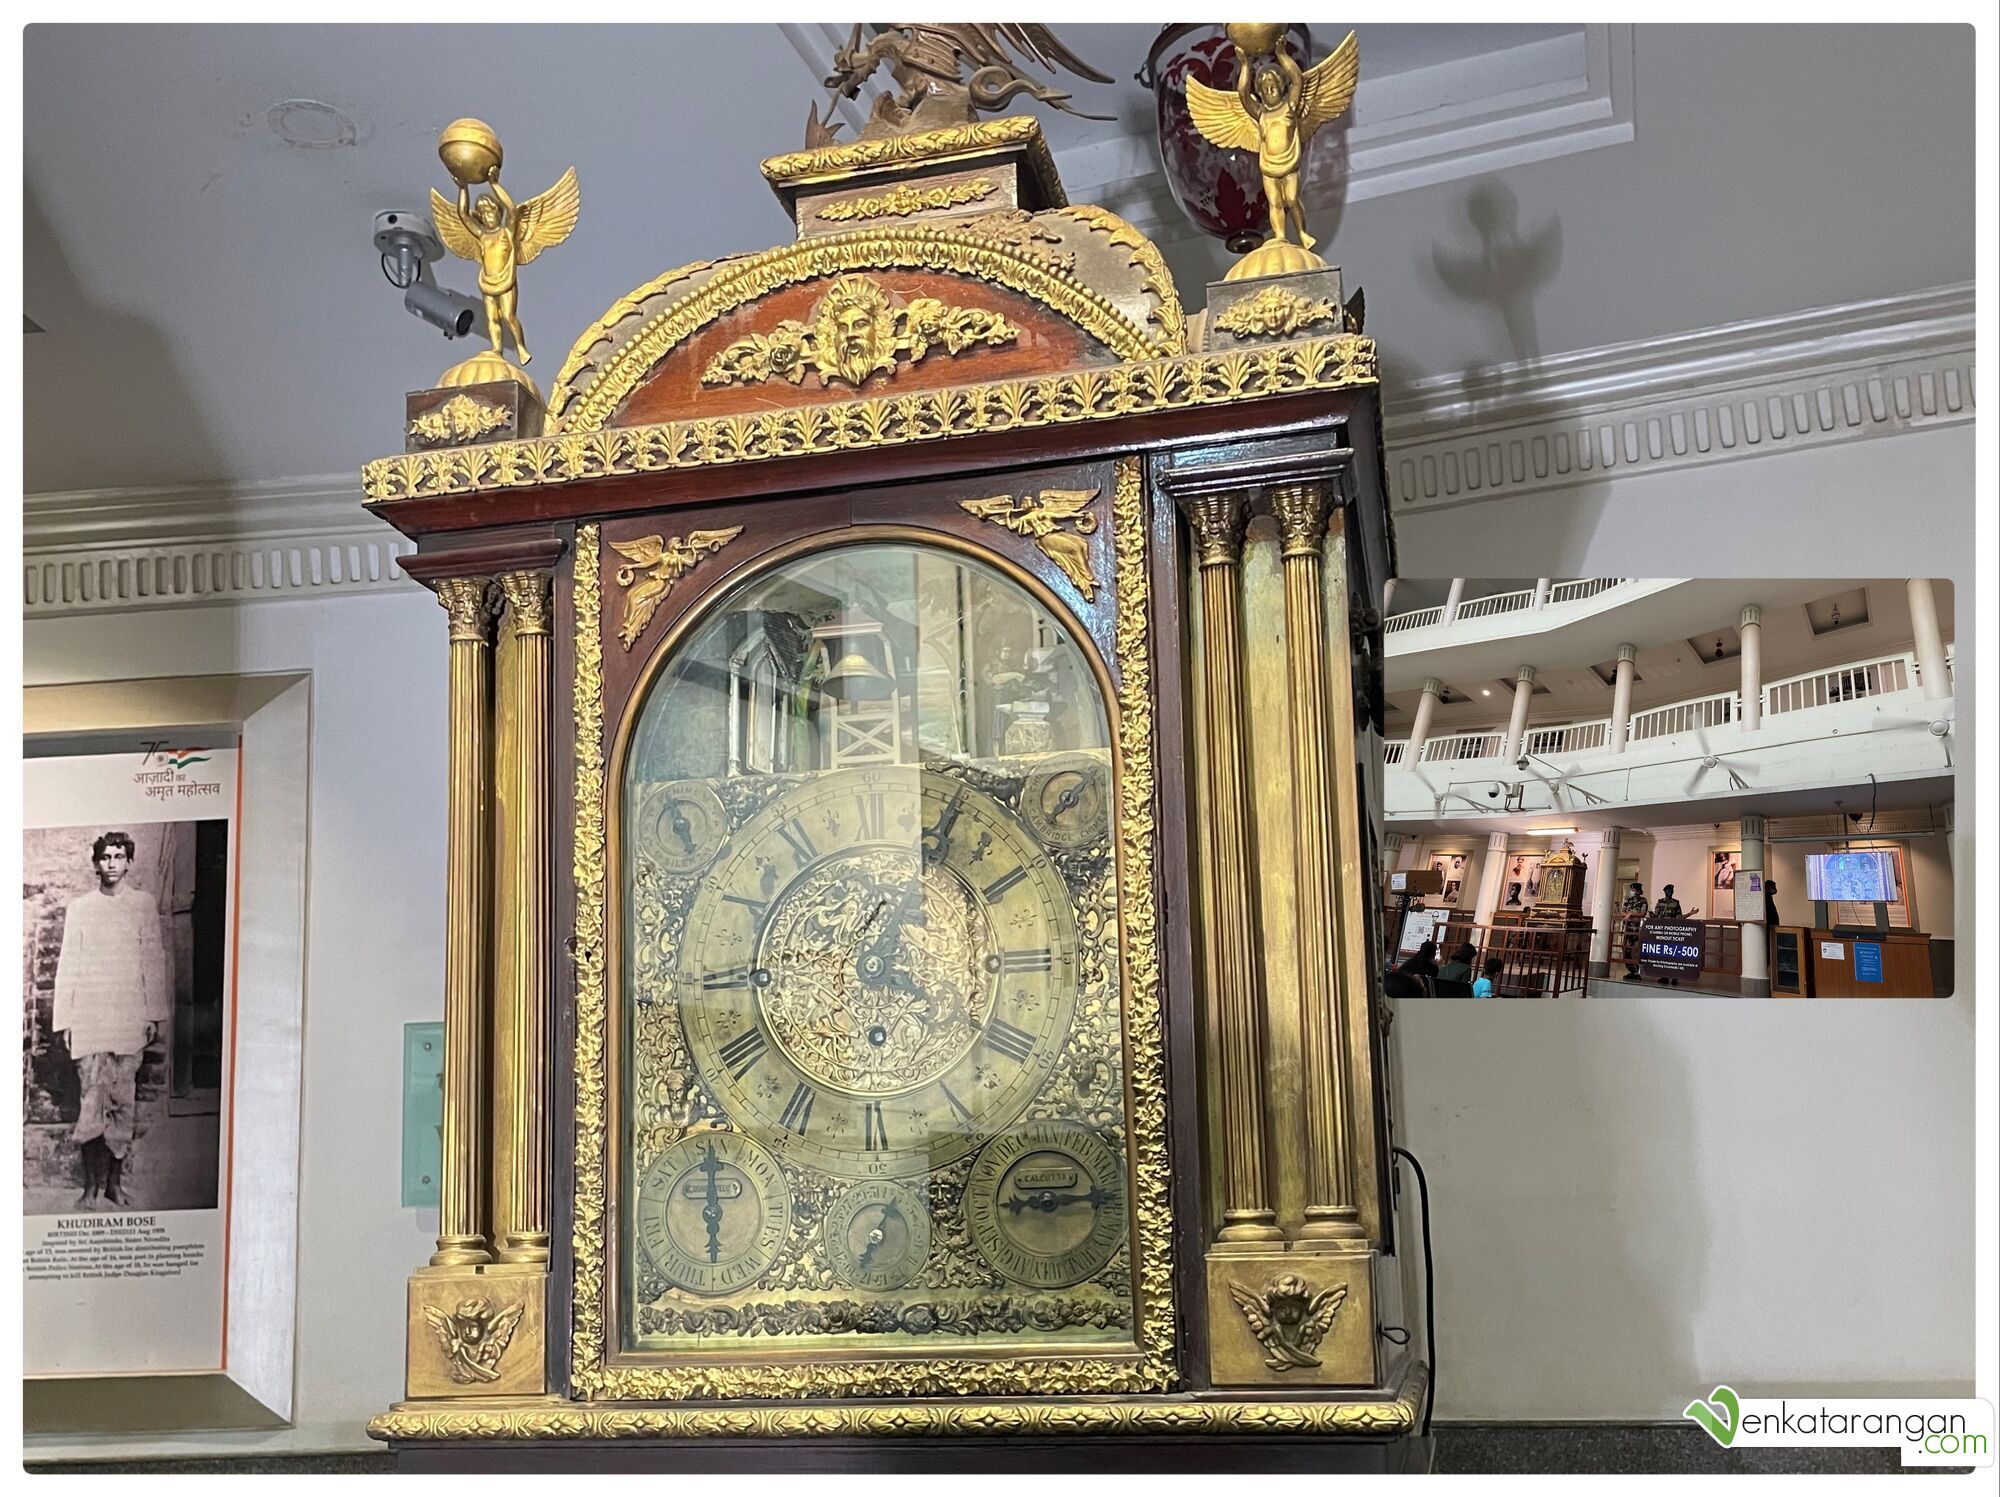 The musical clock which Salar Jung III bought from Cook and Kelvey of England - with over 350 parts brought seperately and assembled in India. Every hour, a timekeeper emerges from the upper deck of the clock and strikes a gong as many times as it is the hours of the day.